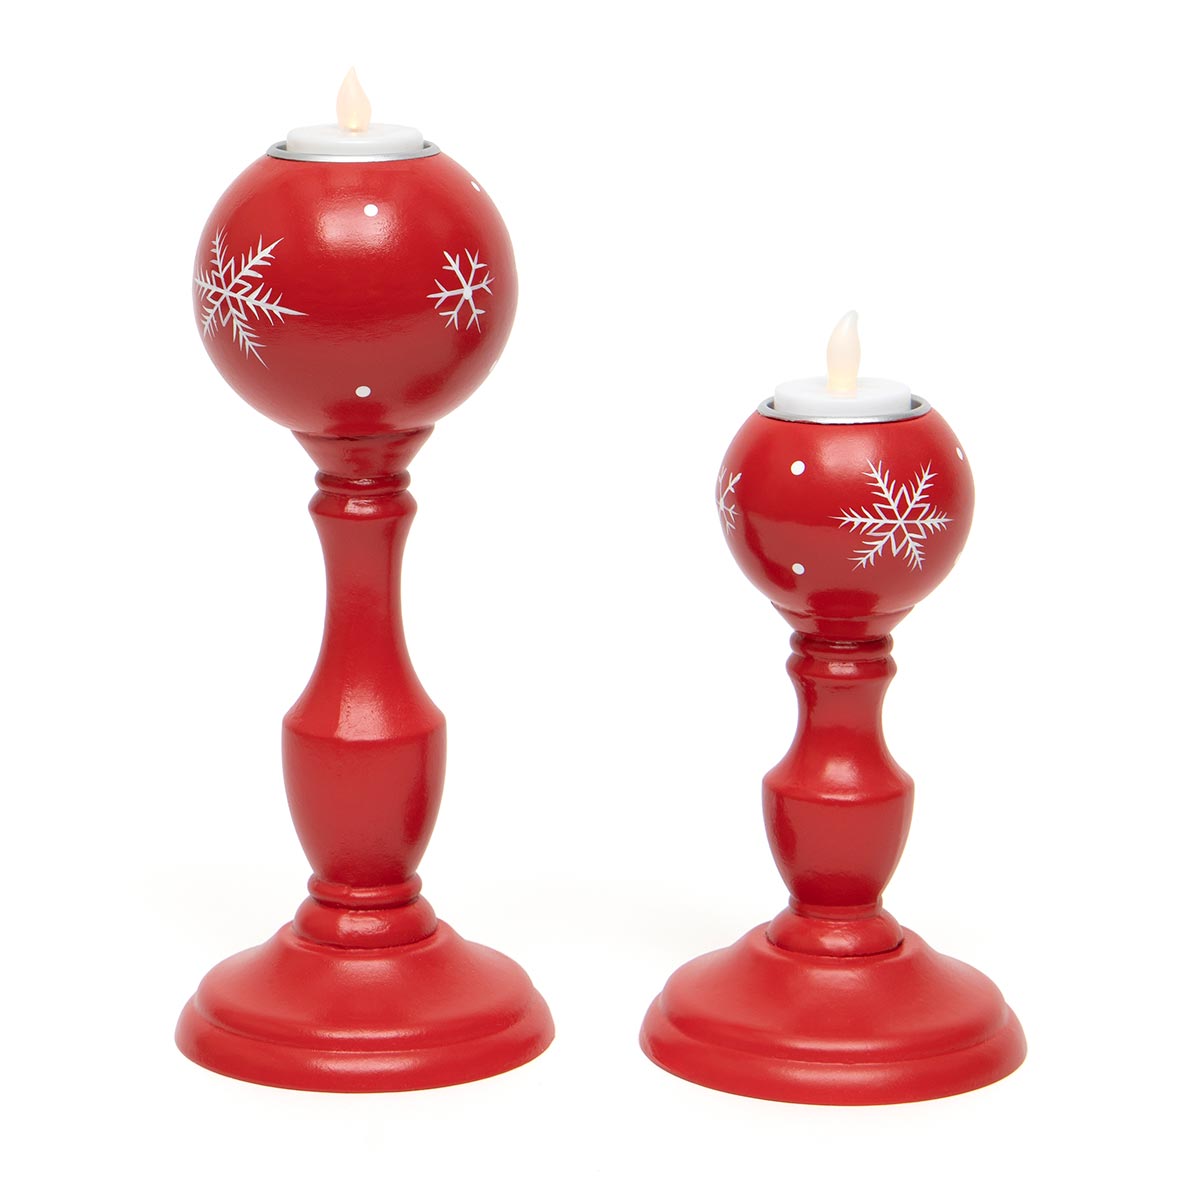 !SWEDISH BALL CANDLEHOLDER RED/WHITE WITH SNOWFLAKES SMALL